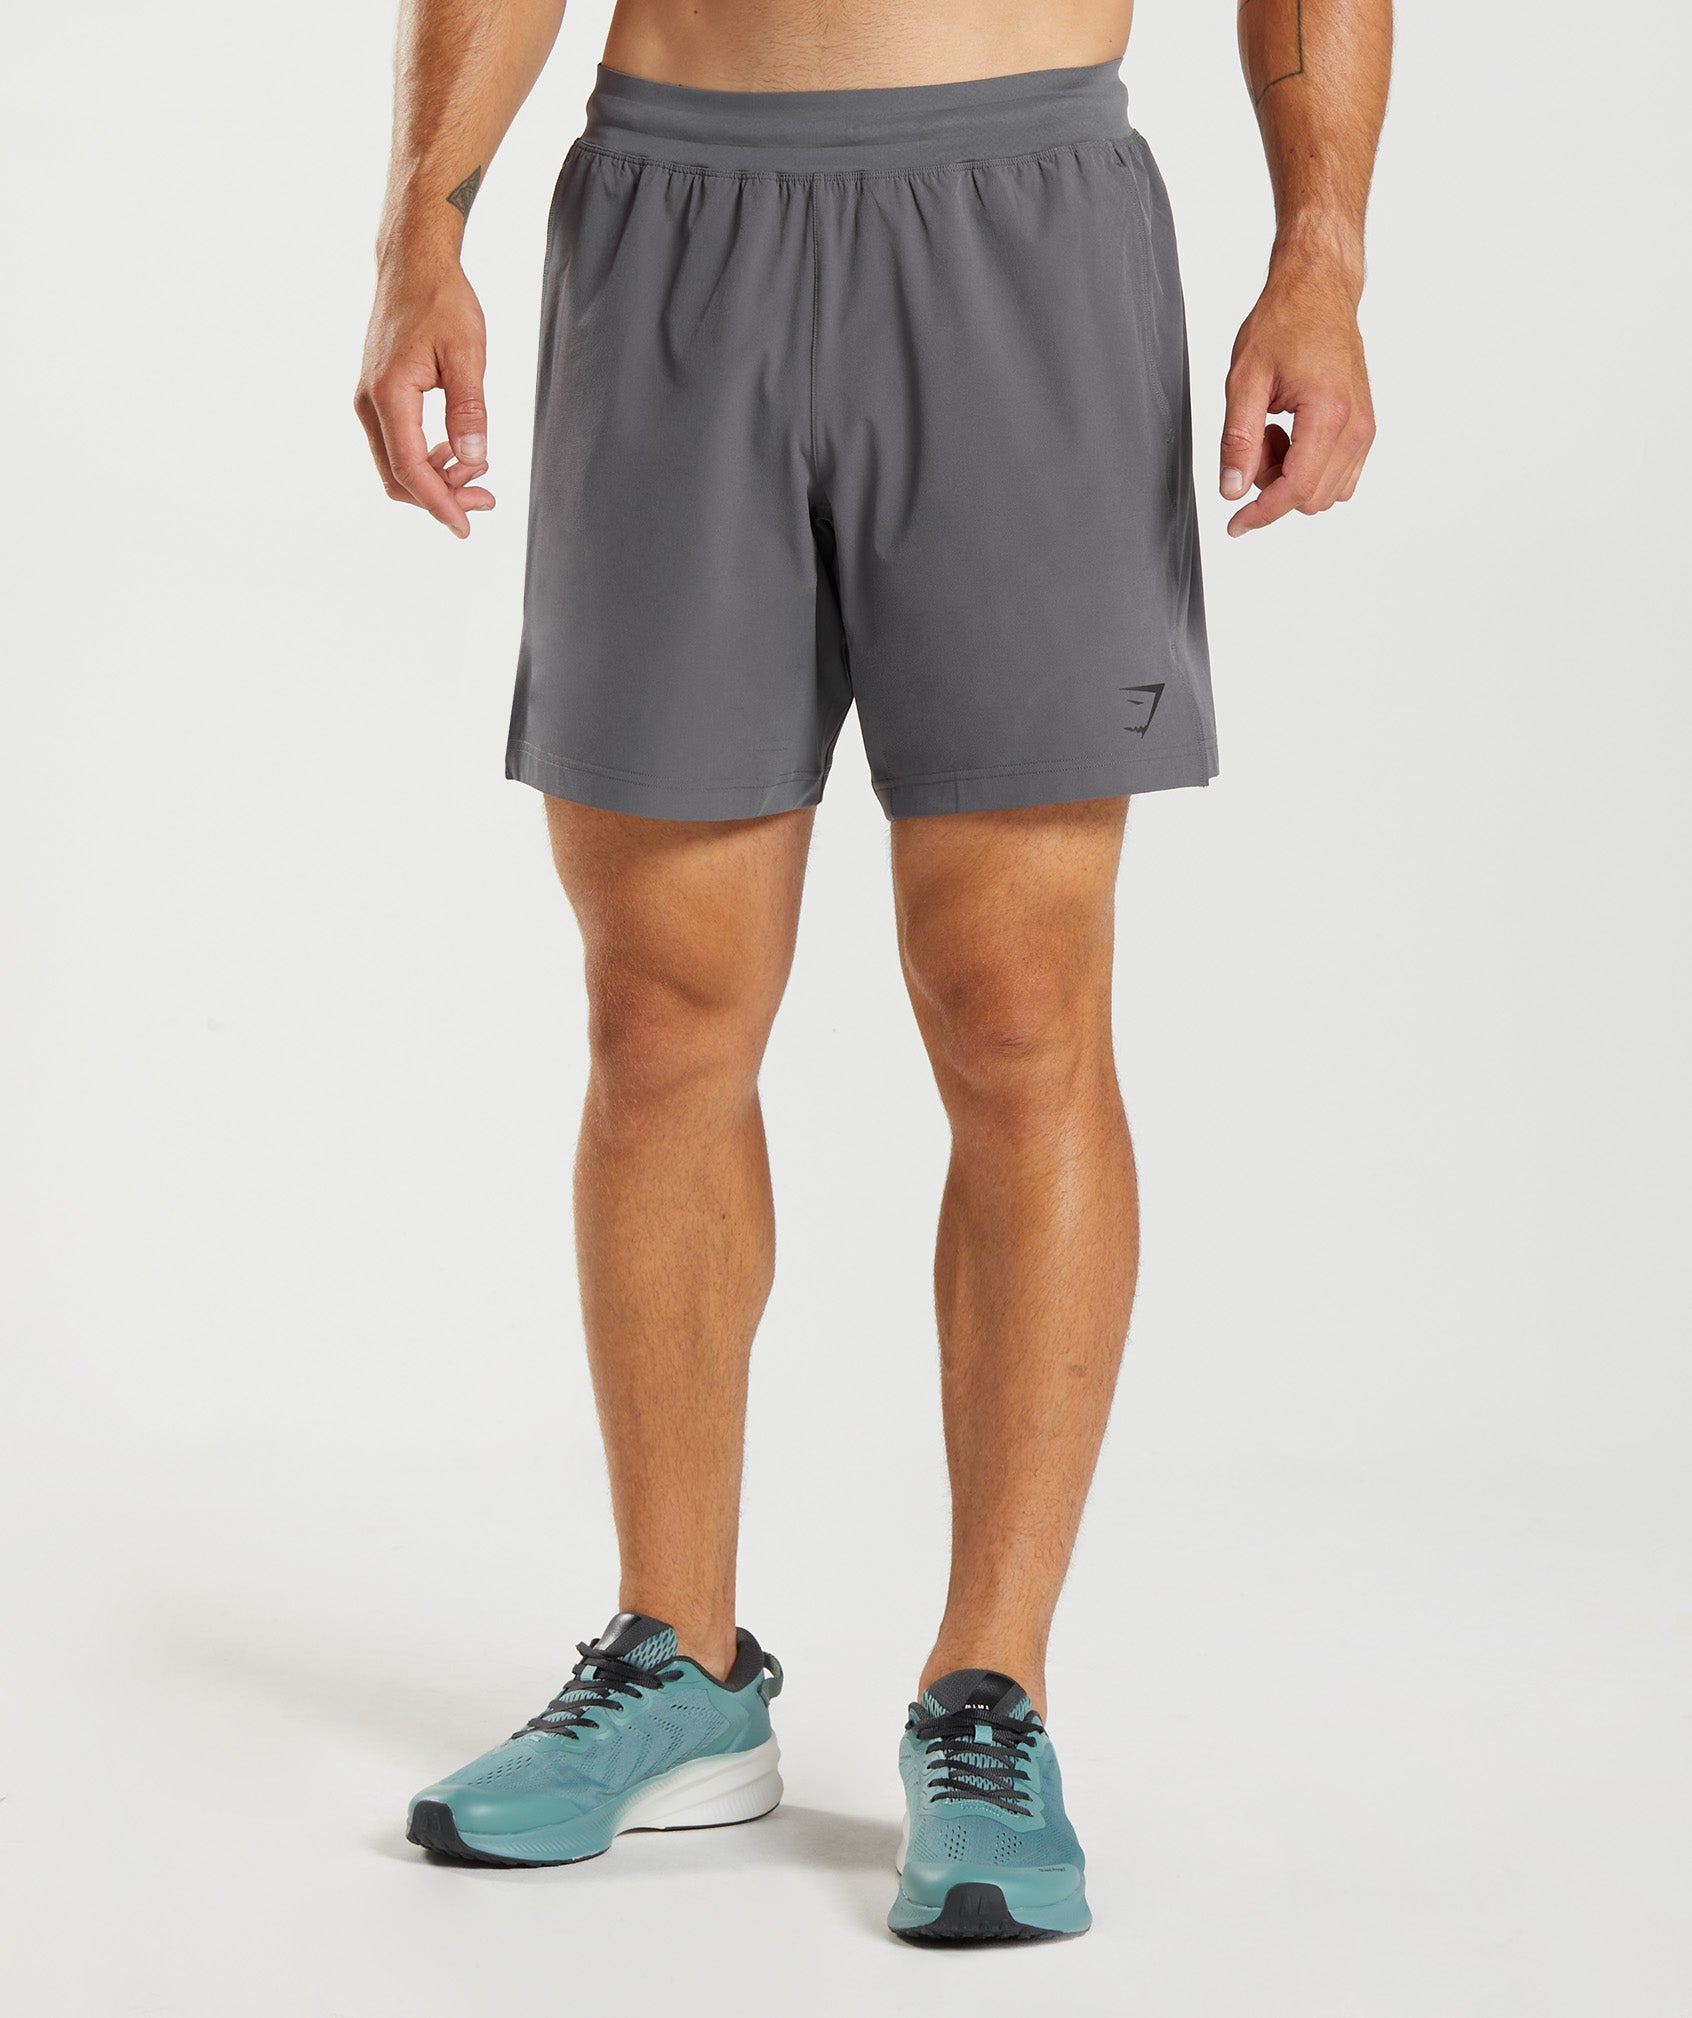 Apex 8" Function Shorts in Silhouette Grey - view 1